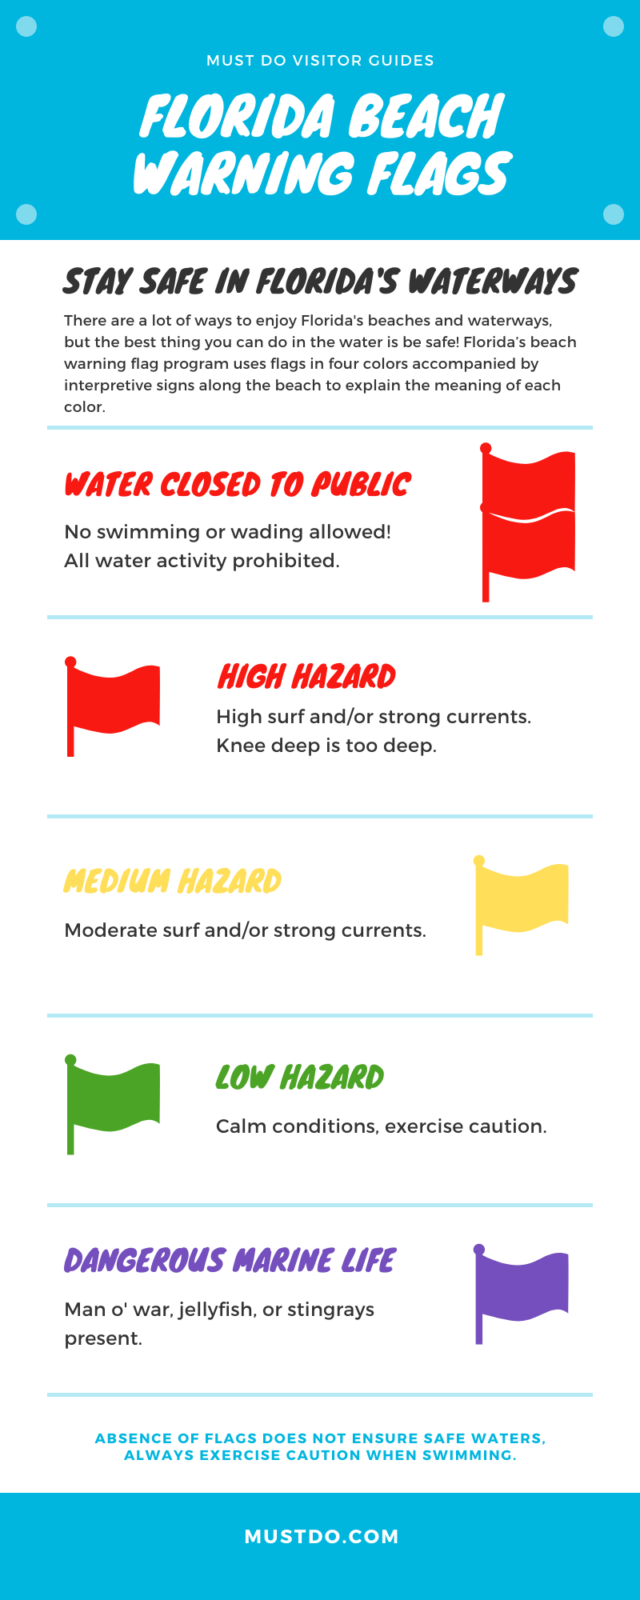 Florida Beach Warning Flags Infographic. Learn all about Florida’s beach warning flags beach warning flags and what they mean. Signs and flags are posted at each beach public access point. Must Do Visitor Guides | MustDo.com